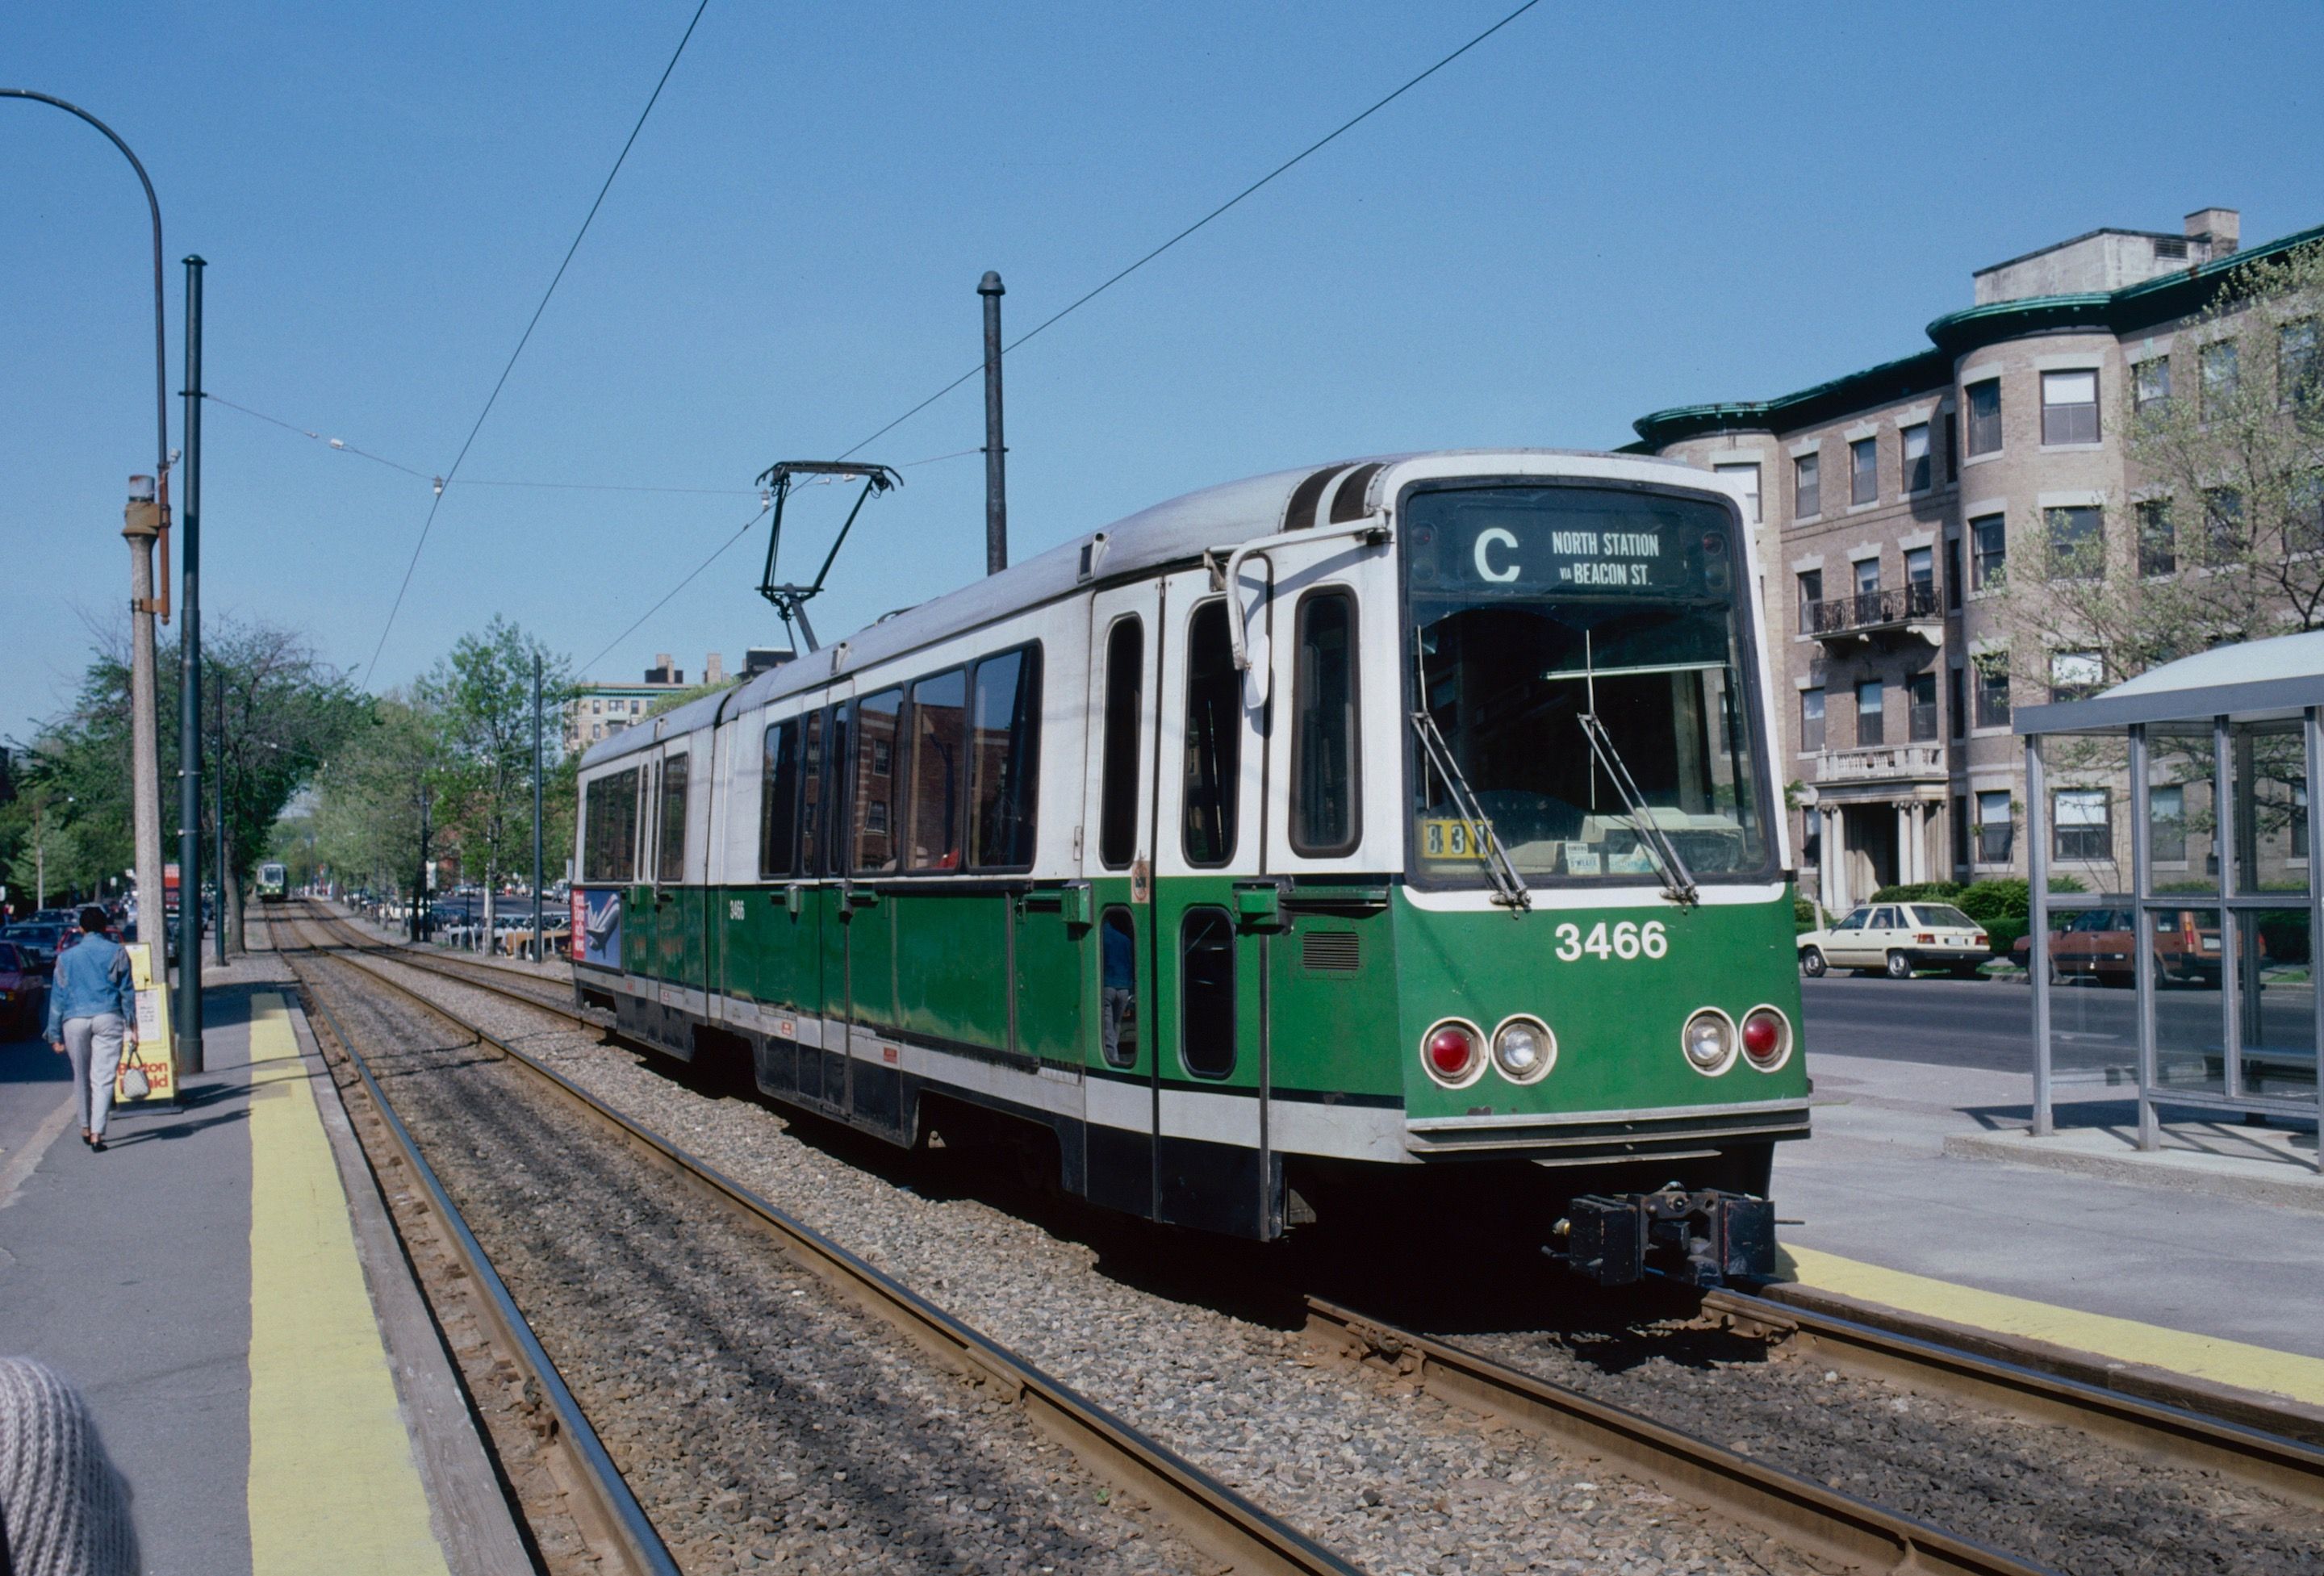 A Boeing LRV on the MBTA green line at Beacon and Hawes.